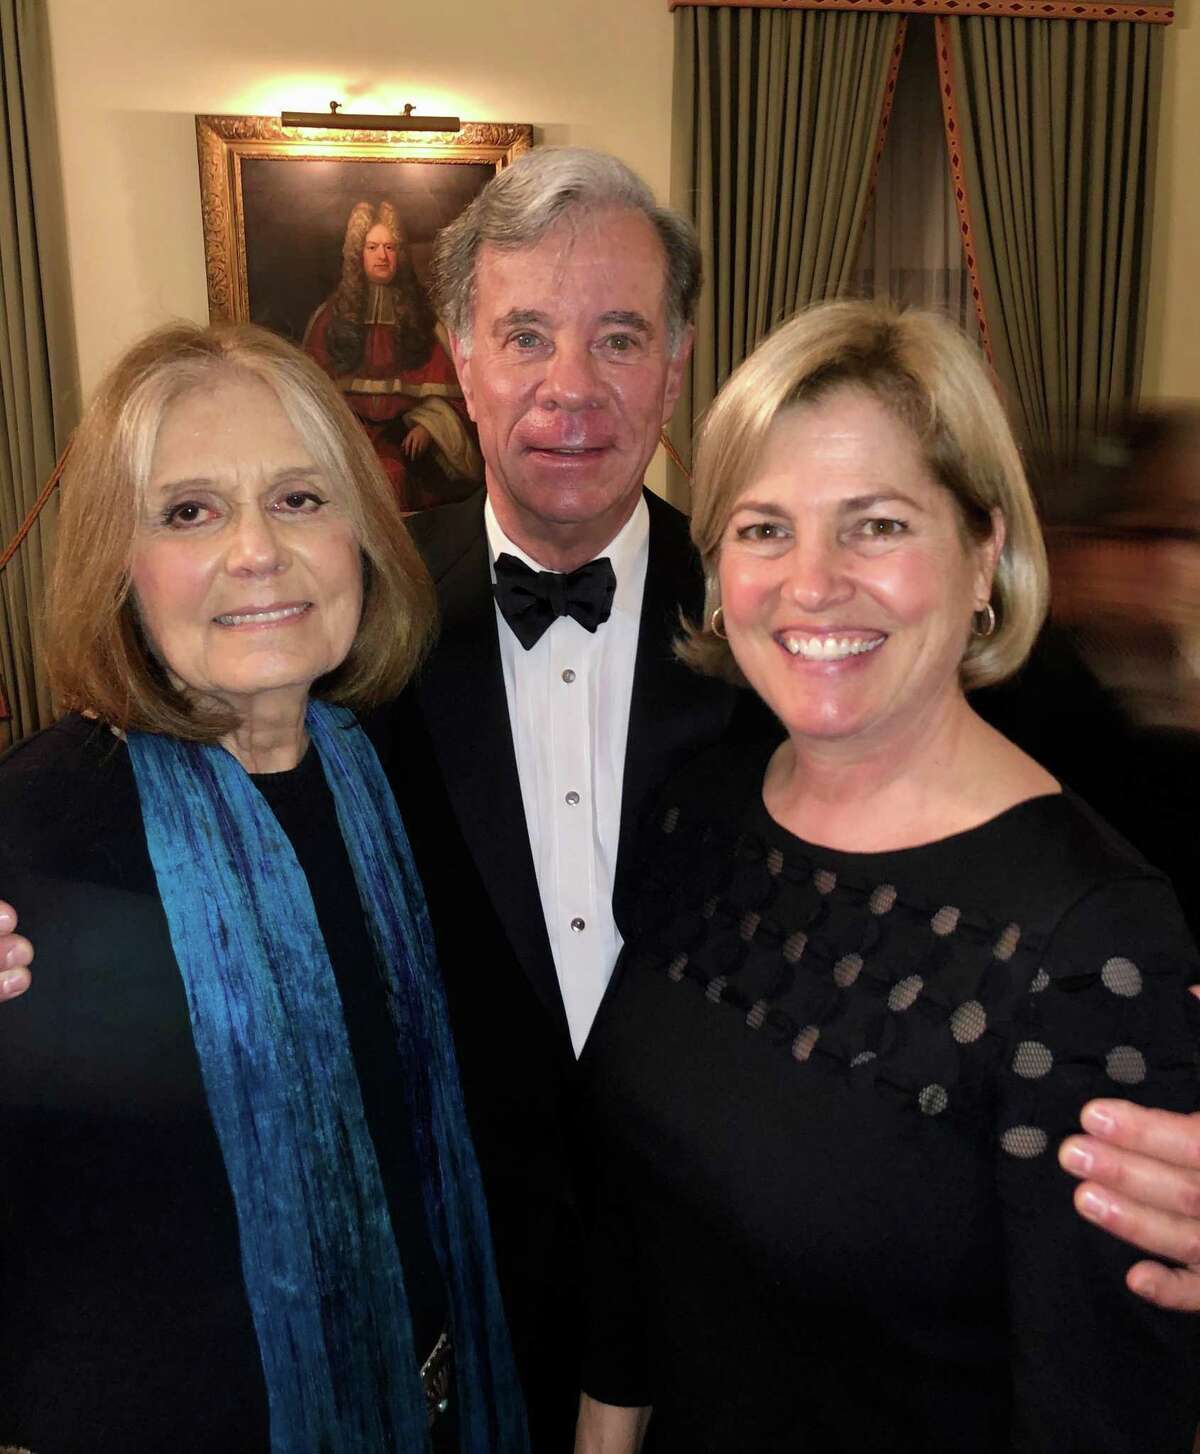 Journalist Gloria Steinem with Dr. Darrick Antell and his wife Dr. Lisa Antell at a dinner with the Medical Strollers at the Union Club in NYC last month.